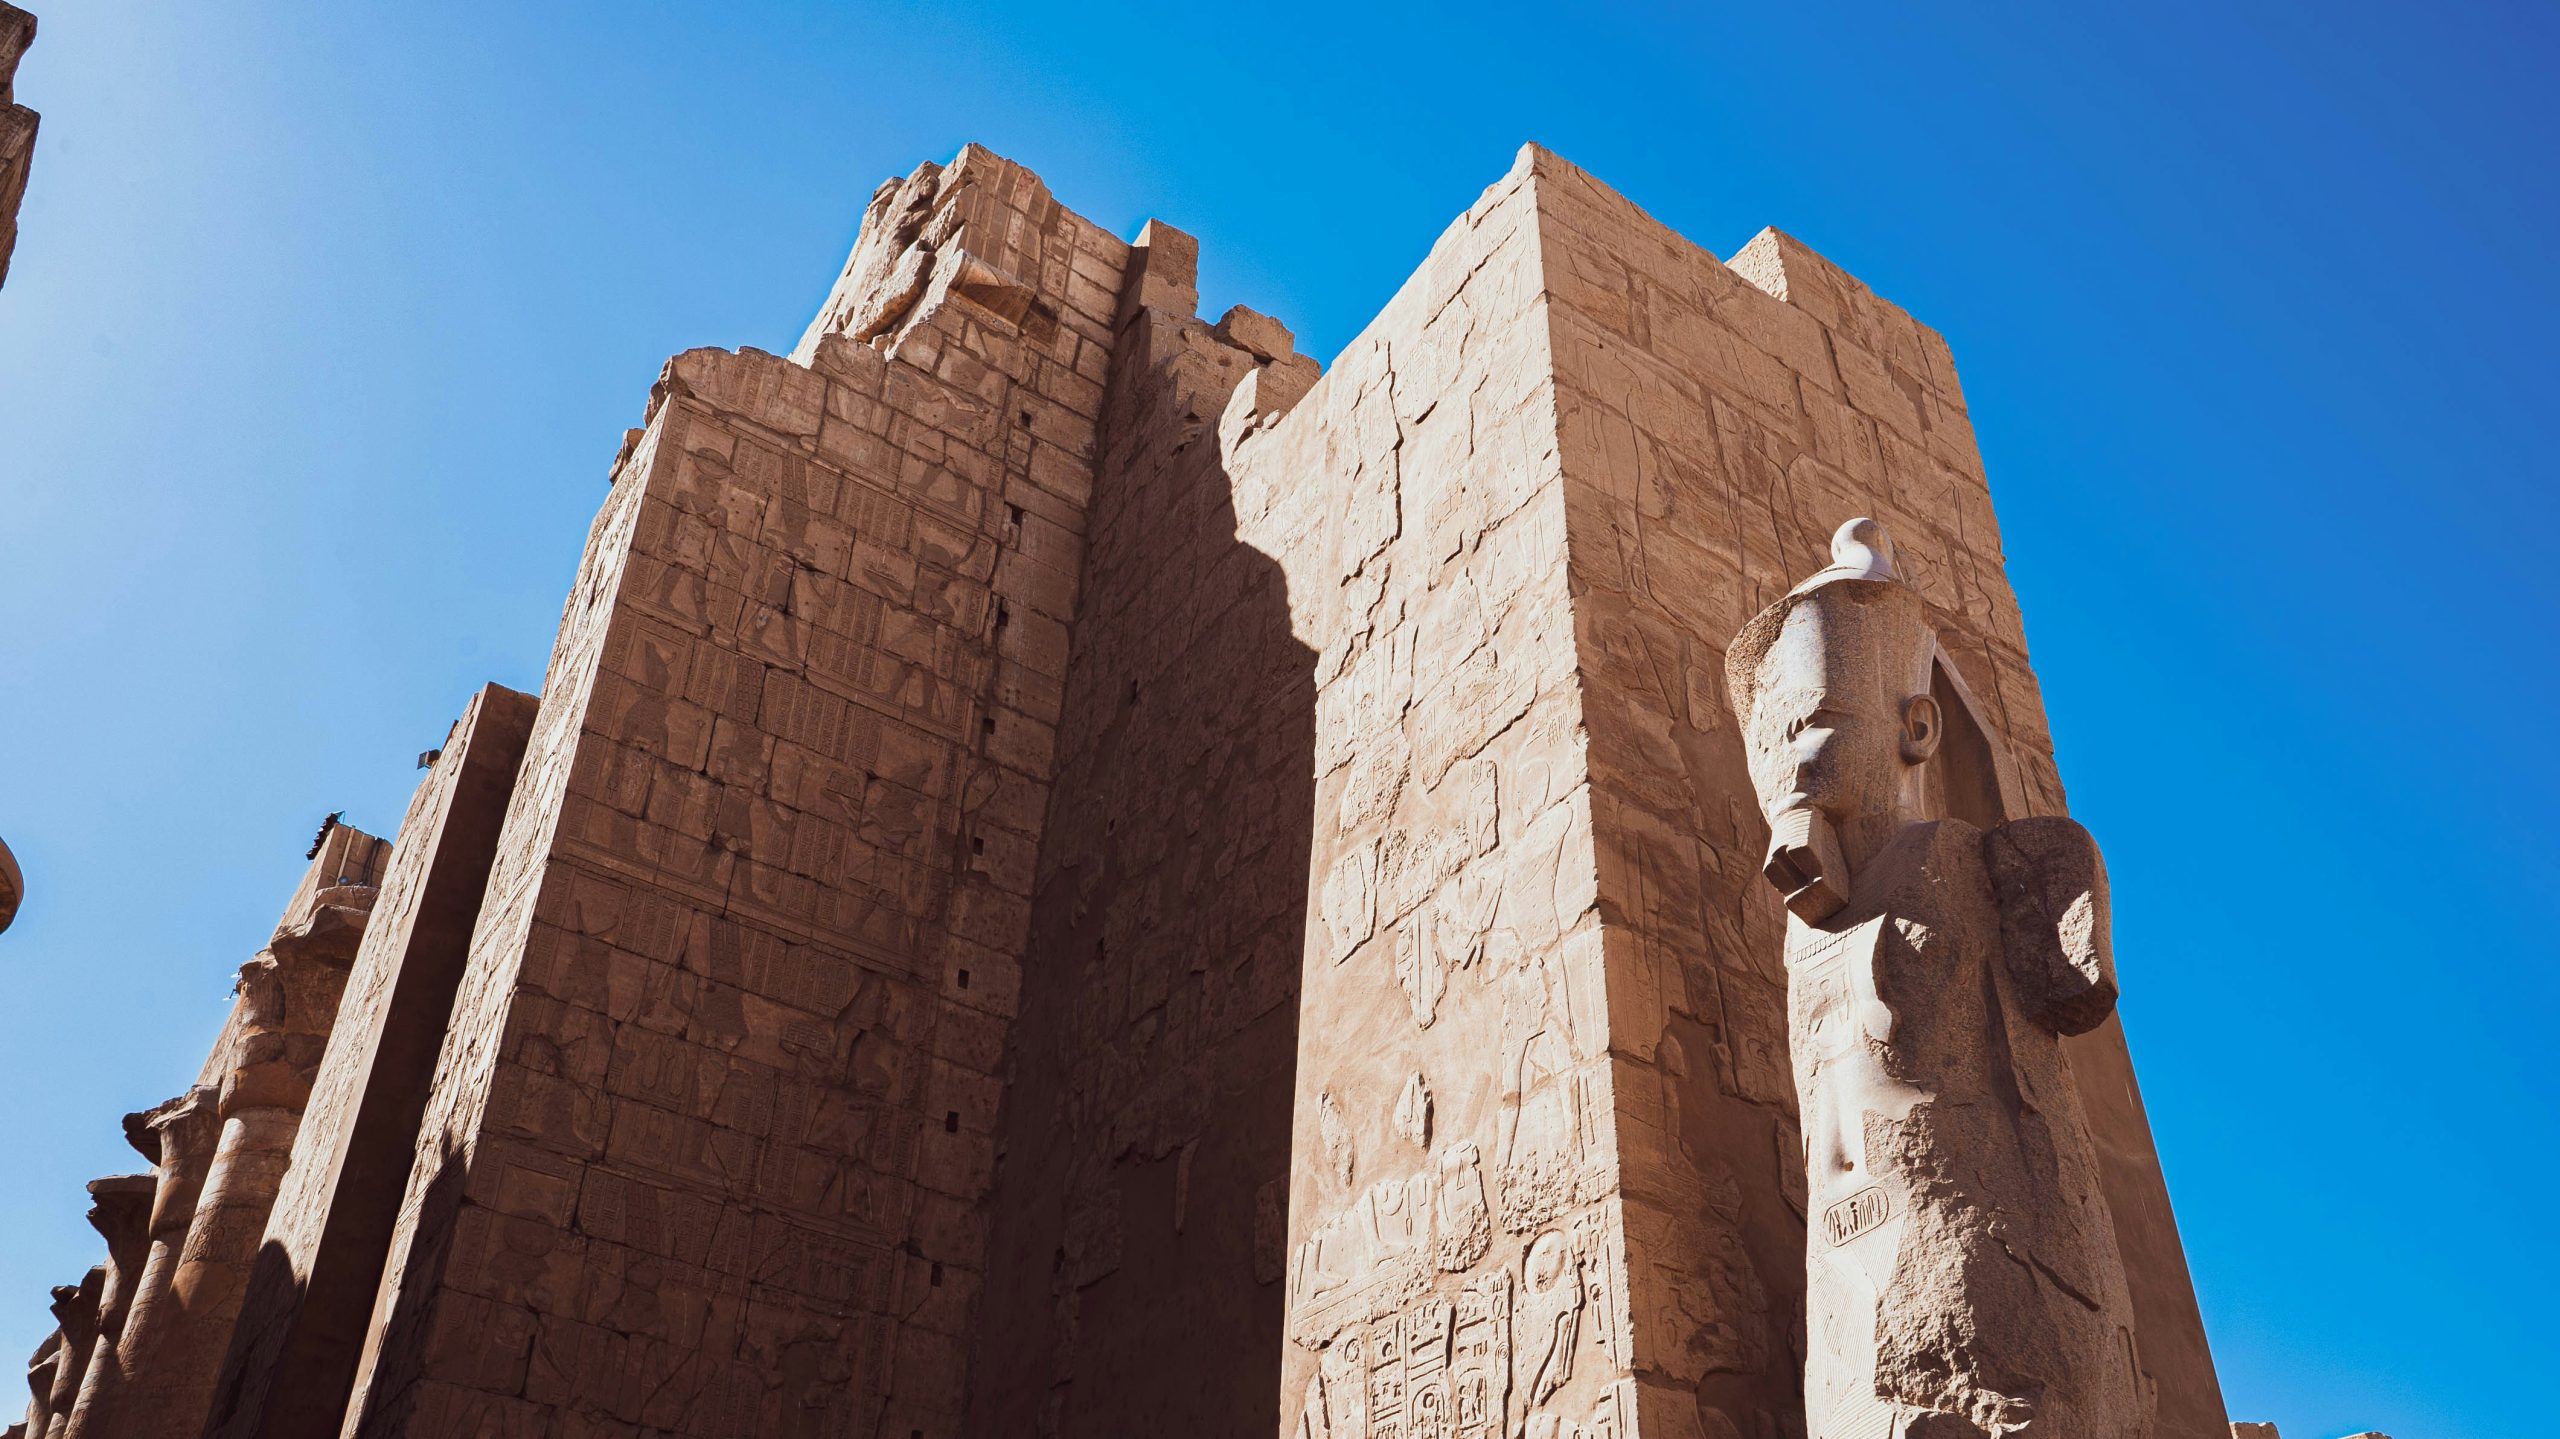 discover the ancient wonders of luxor temples, hailed as one of the world's most impressive architectural marvels. embark on a journey through time and explore the majestic grandeur of this historically enriched destination.